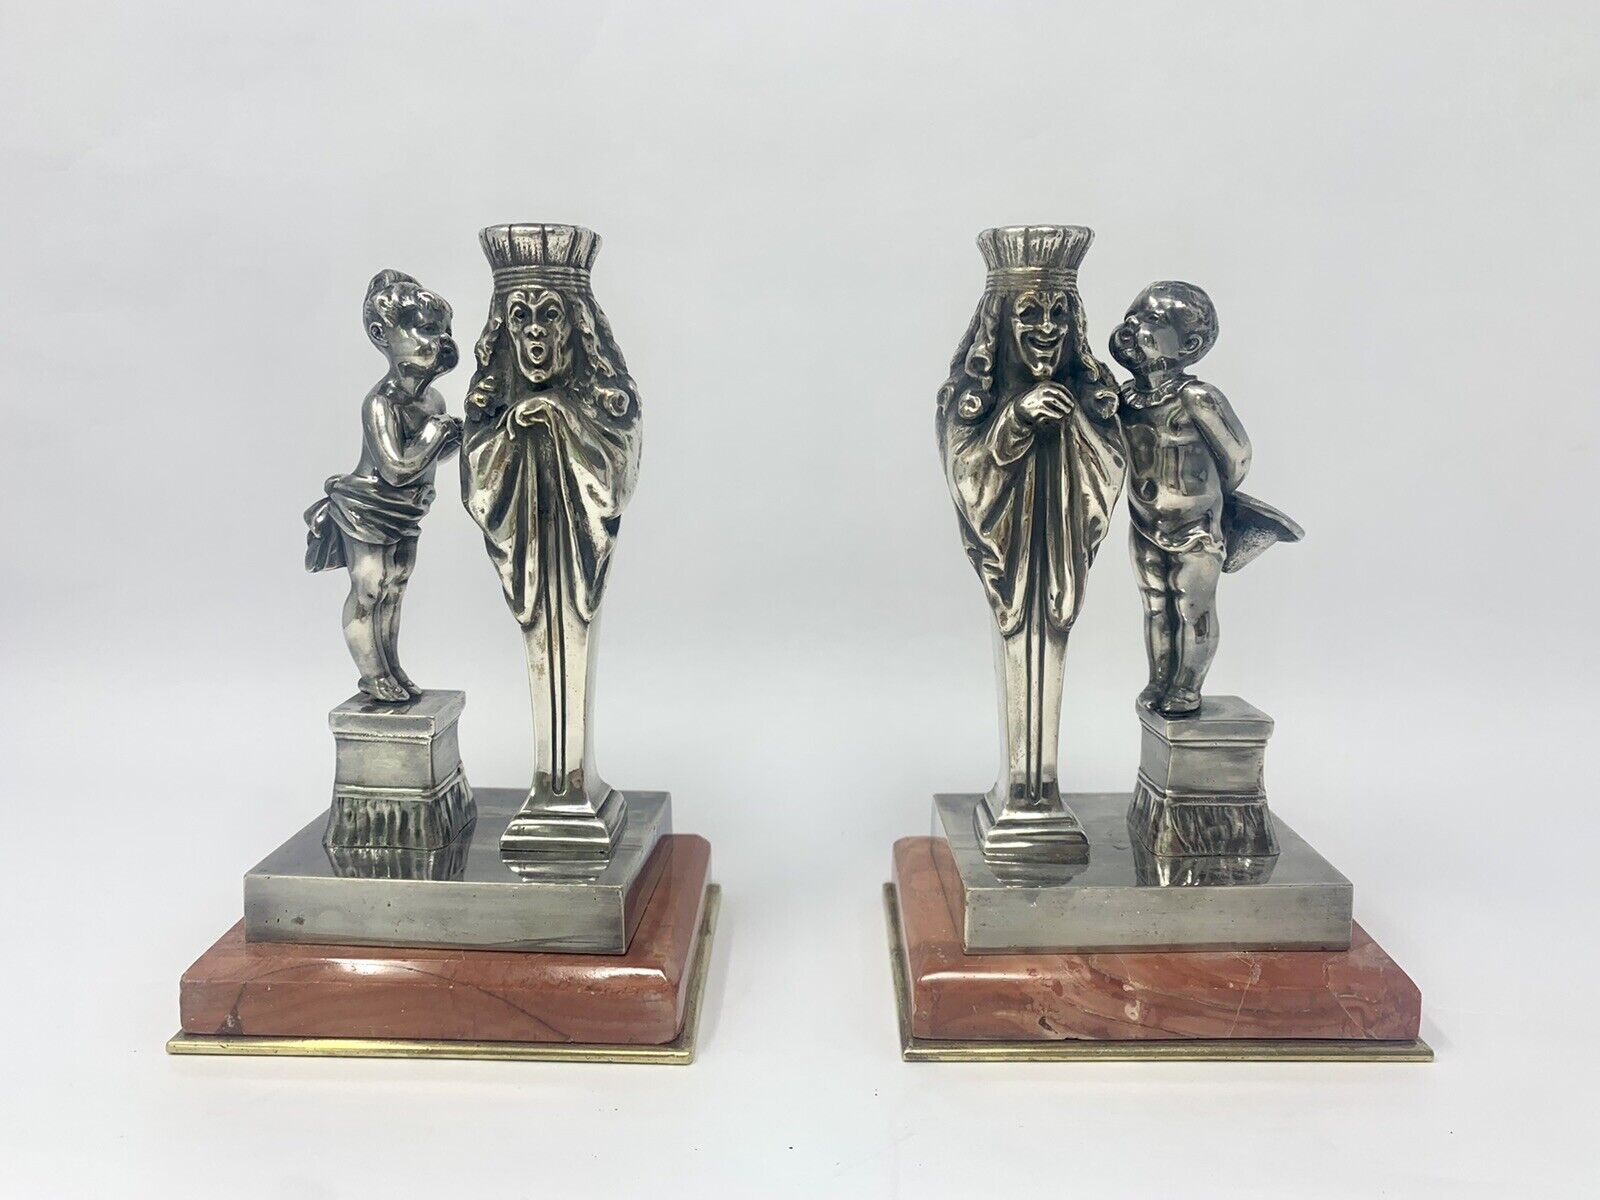  Rare Pair of antique French figural bronze candlesticks by Louis Kley Без бренда